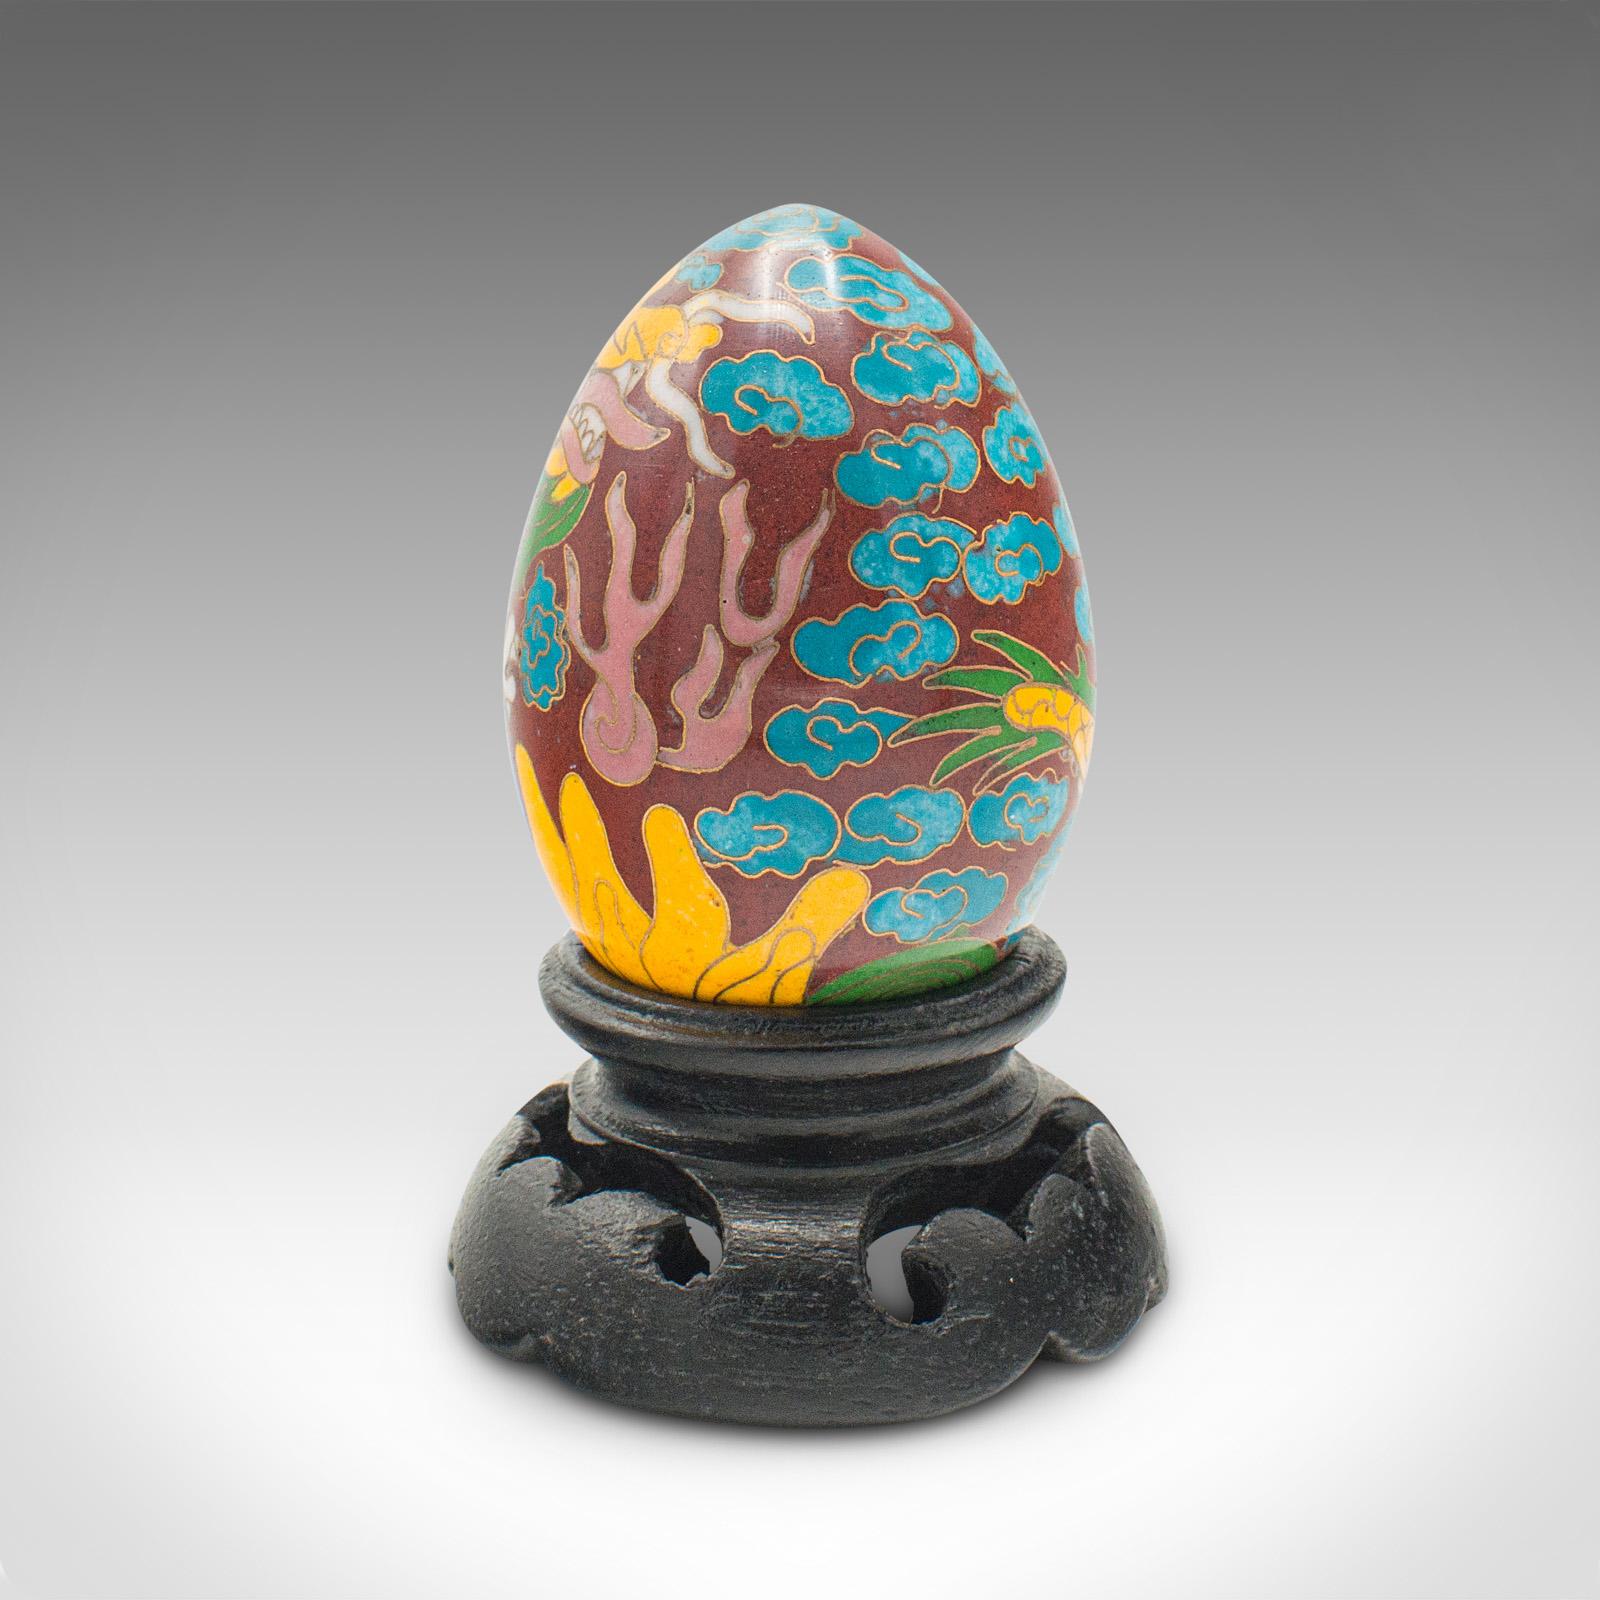 Small Vintage Cloisonne Decorative Egg, Chinese, Enamelled, Ornament, circa 1970 For Sale 1